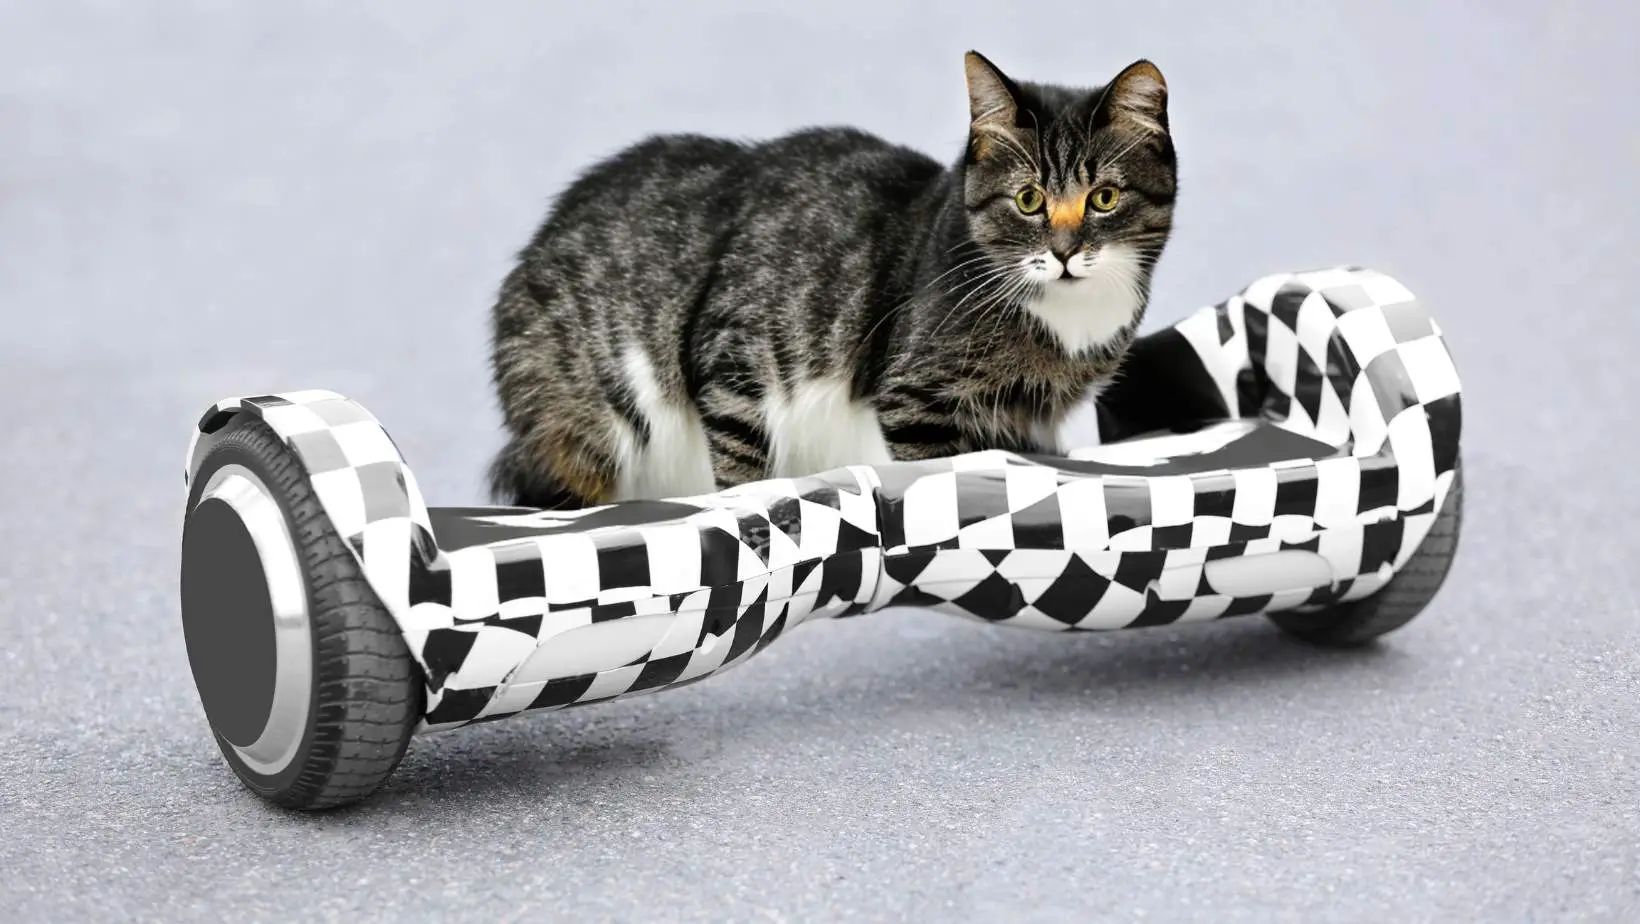 How to Get the Cat Hoverboard?